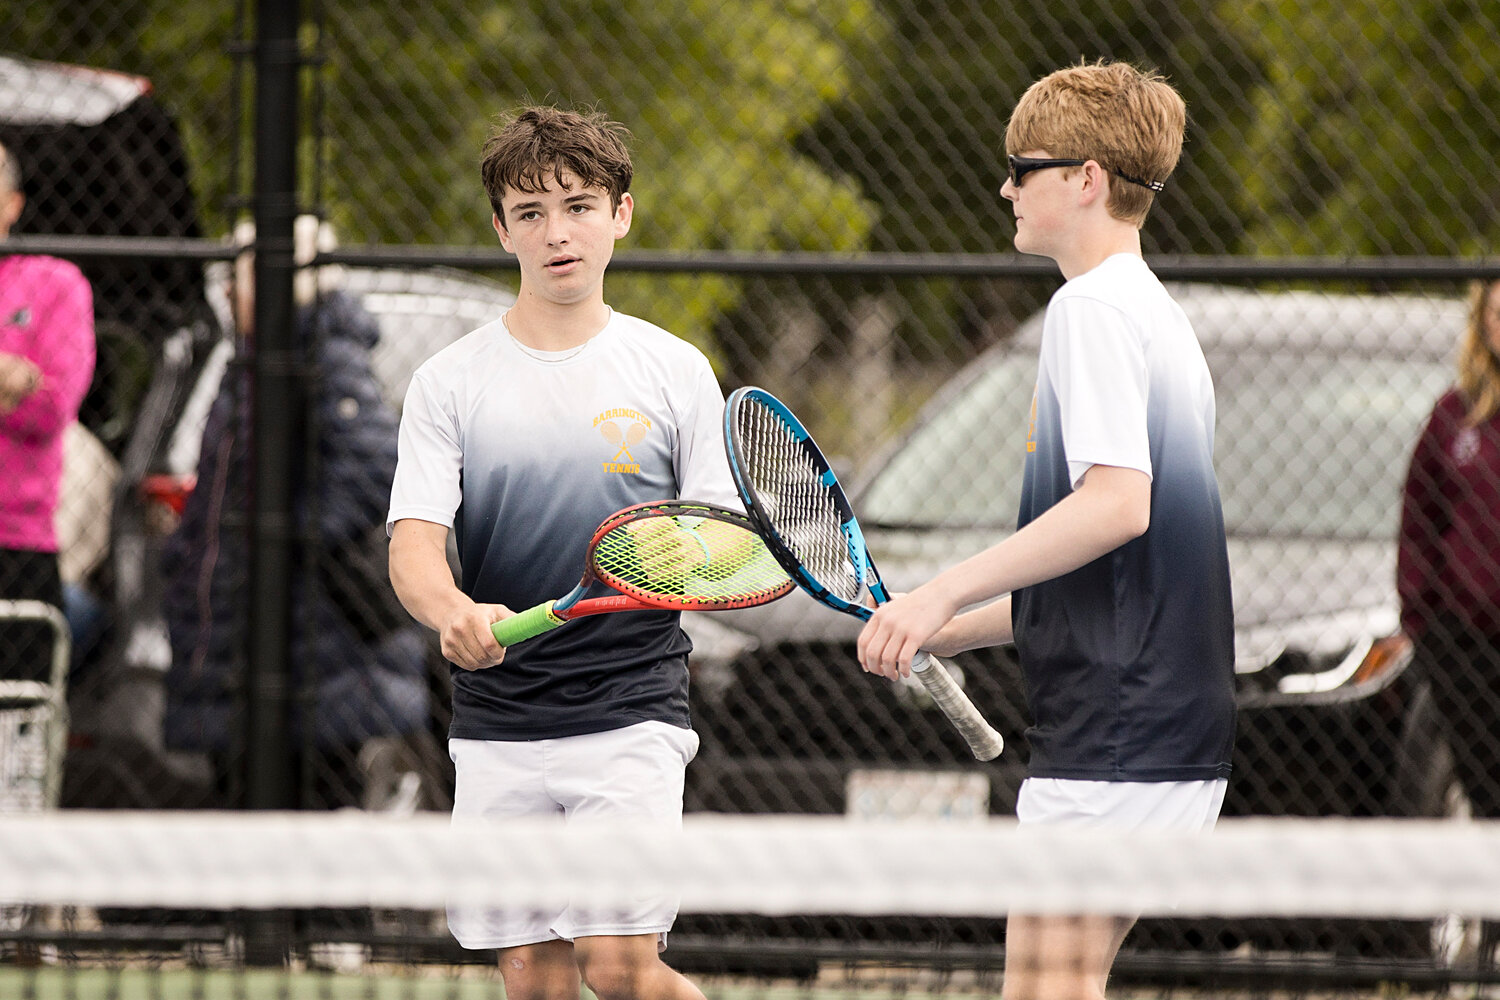 Garrett Meehan (right) and Zach Spear tap rackets after earning a point against LaSalle.